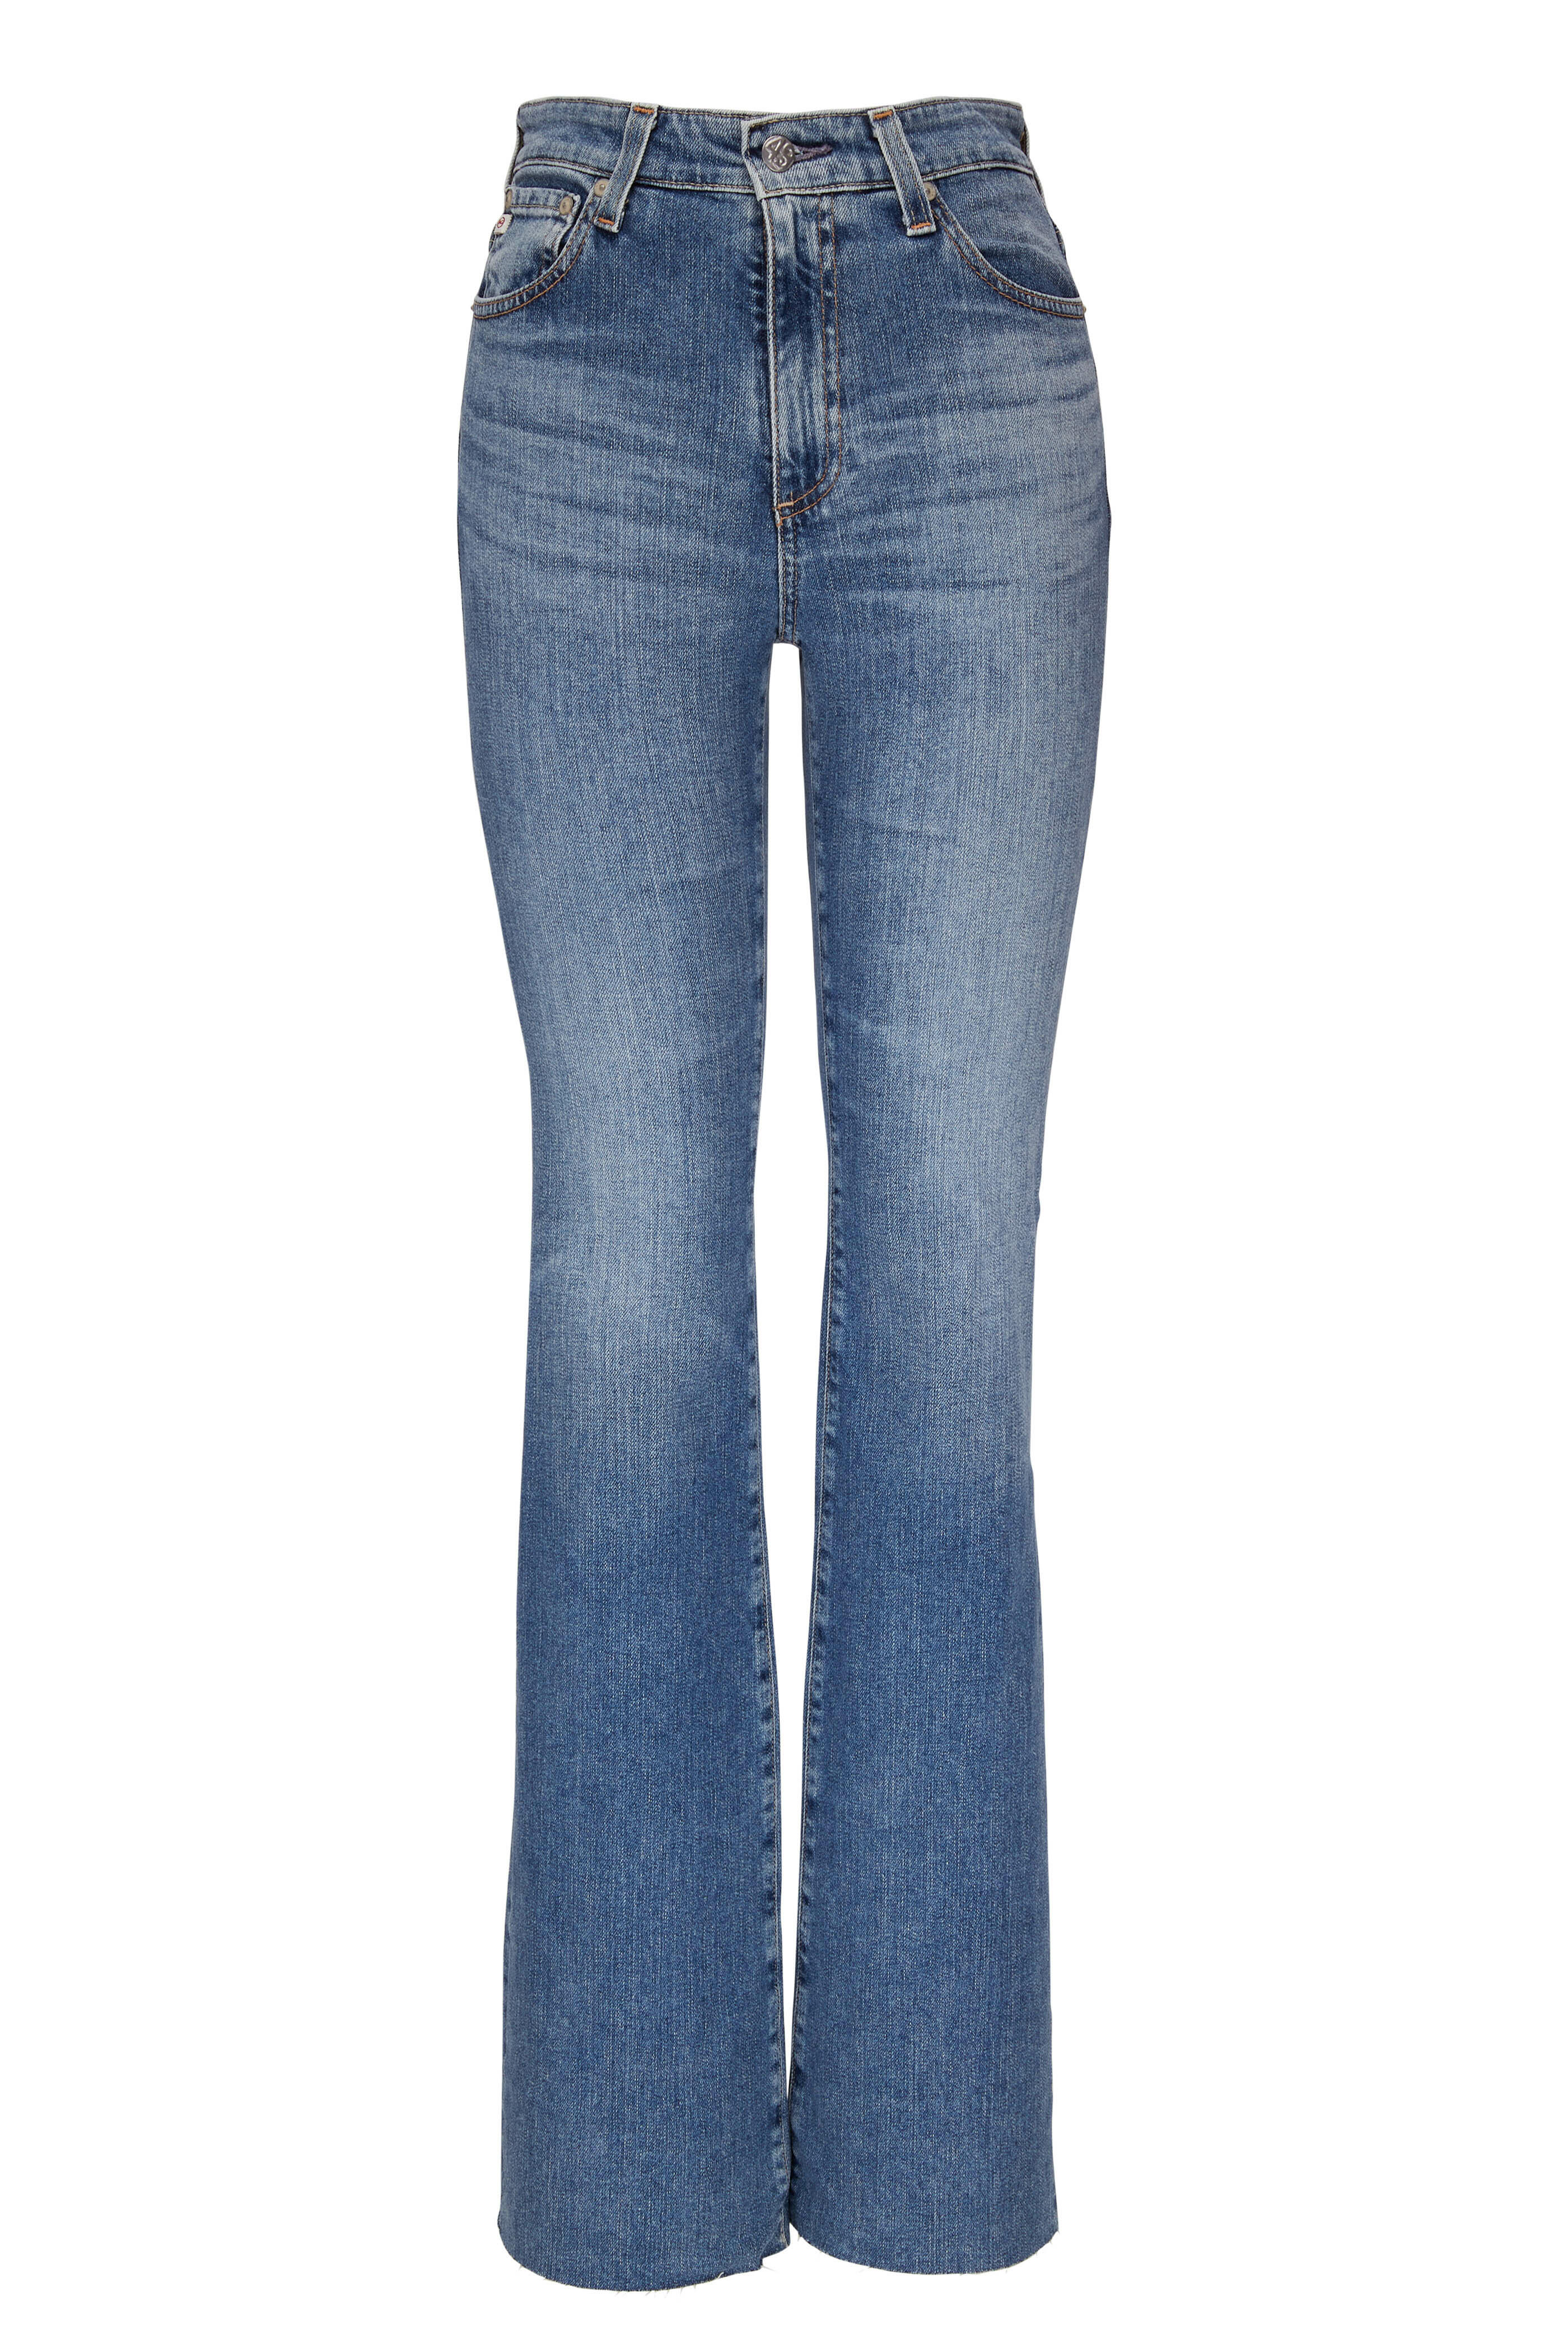 AG - Alexxis 17 Years Waveview Bootcut Jean | Mitchell Stores